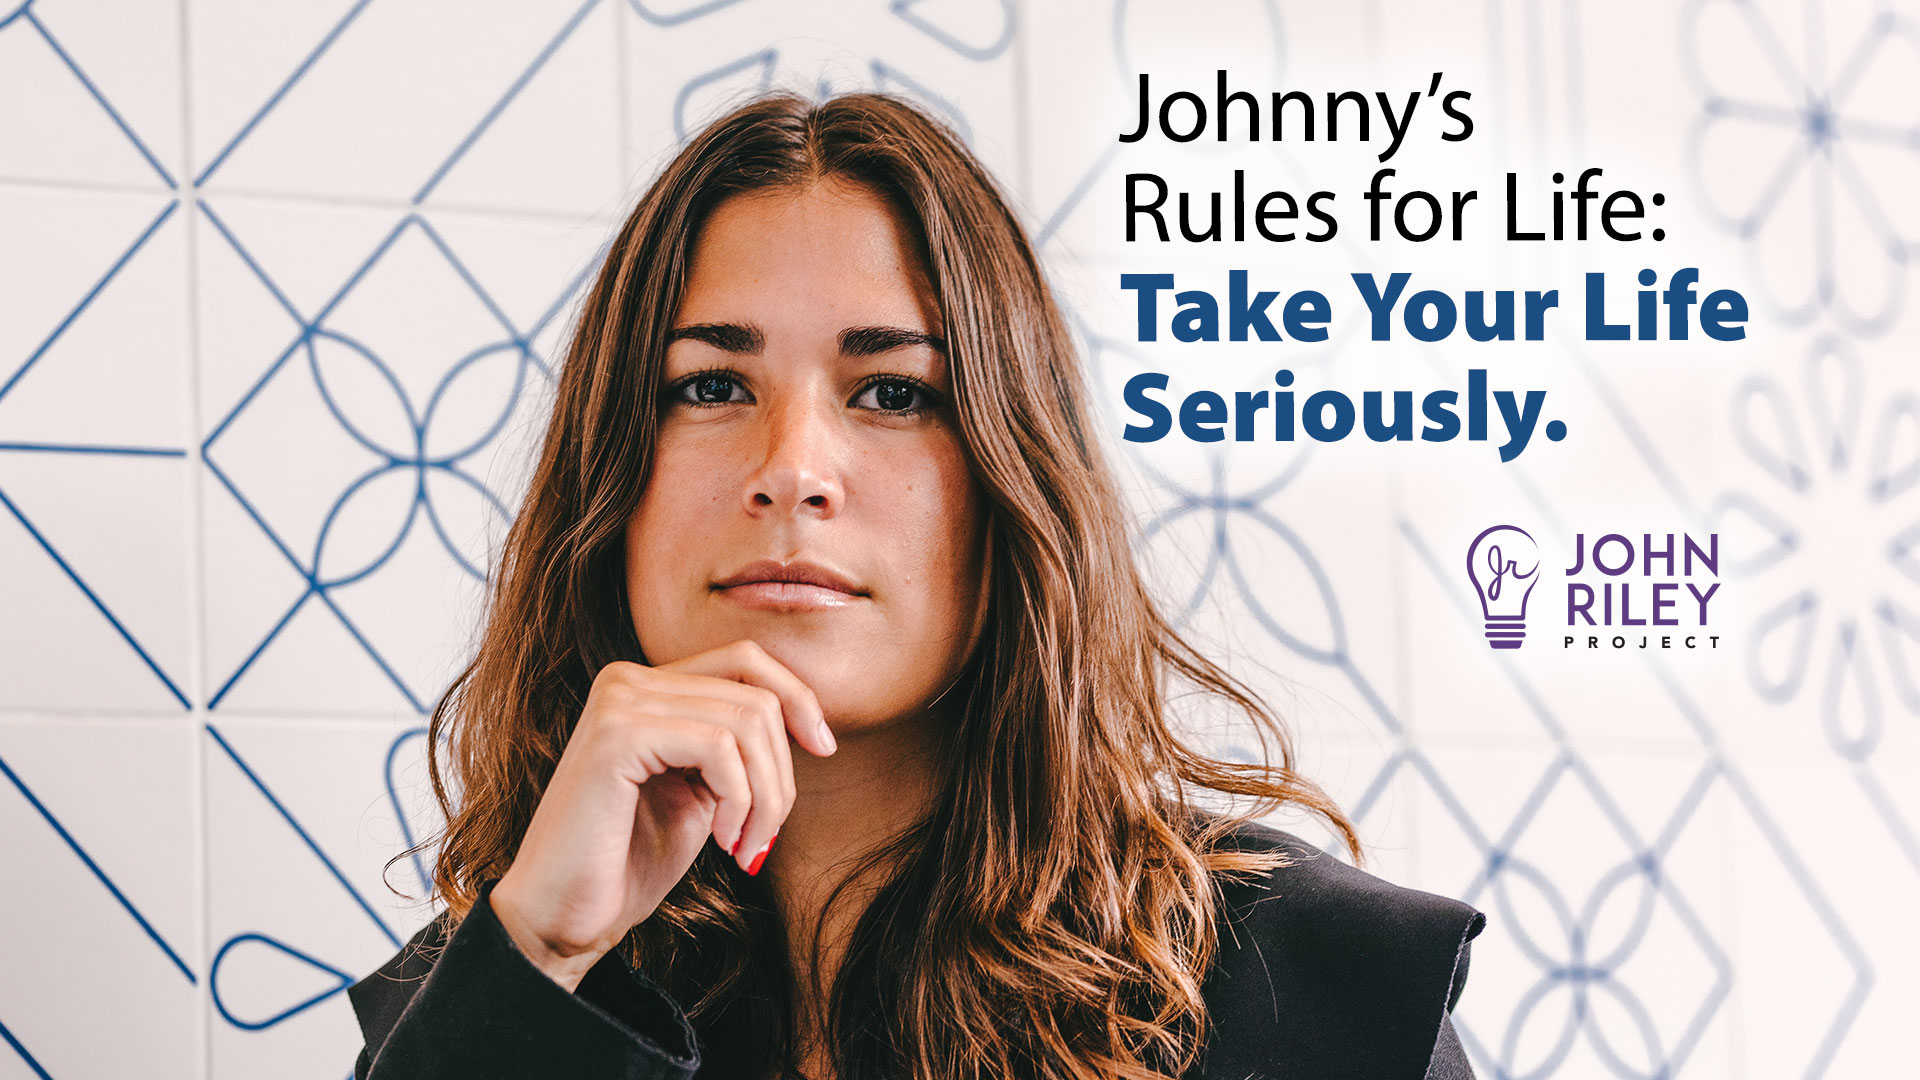 Johnny's Rules for Life, Take Your Life Seriously, John Riley Project